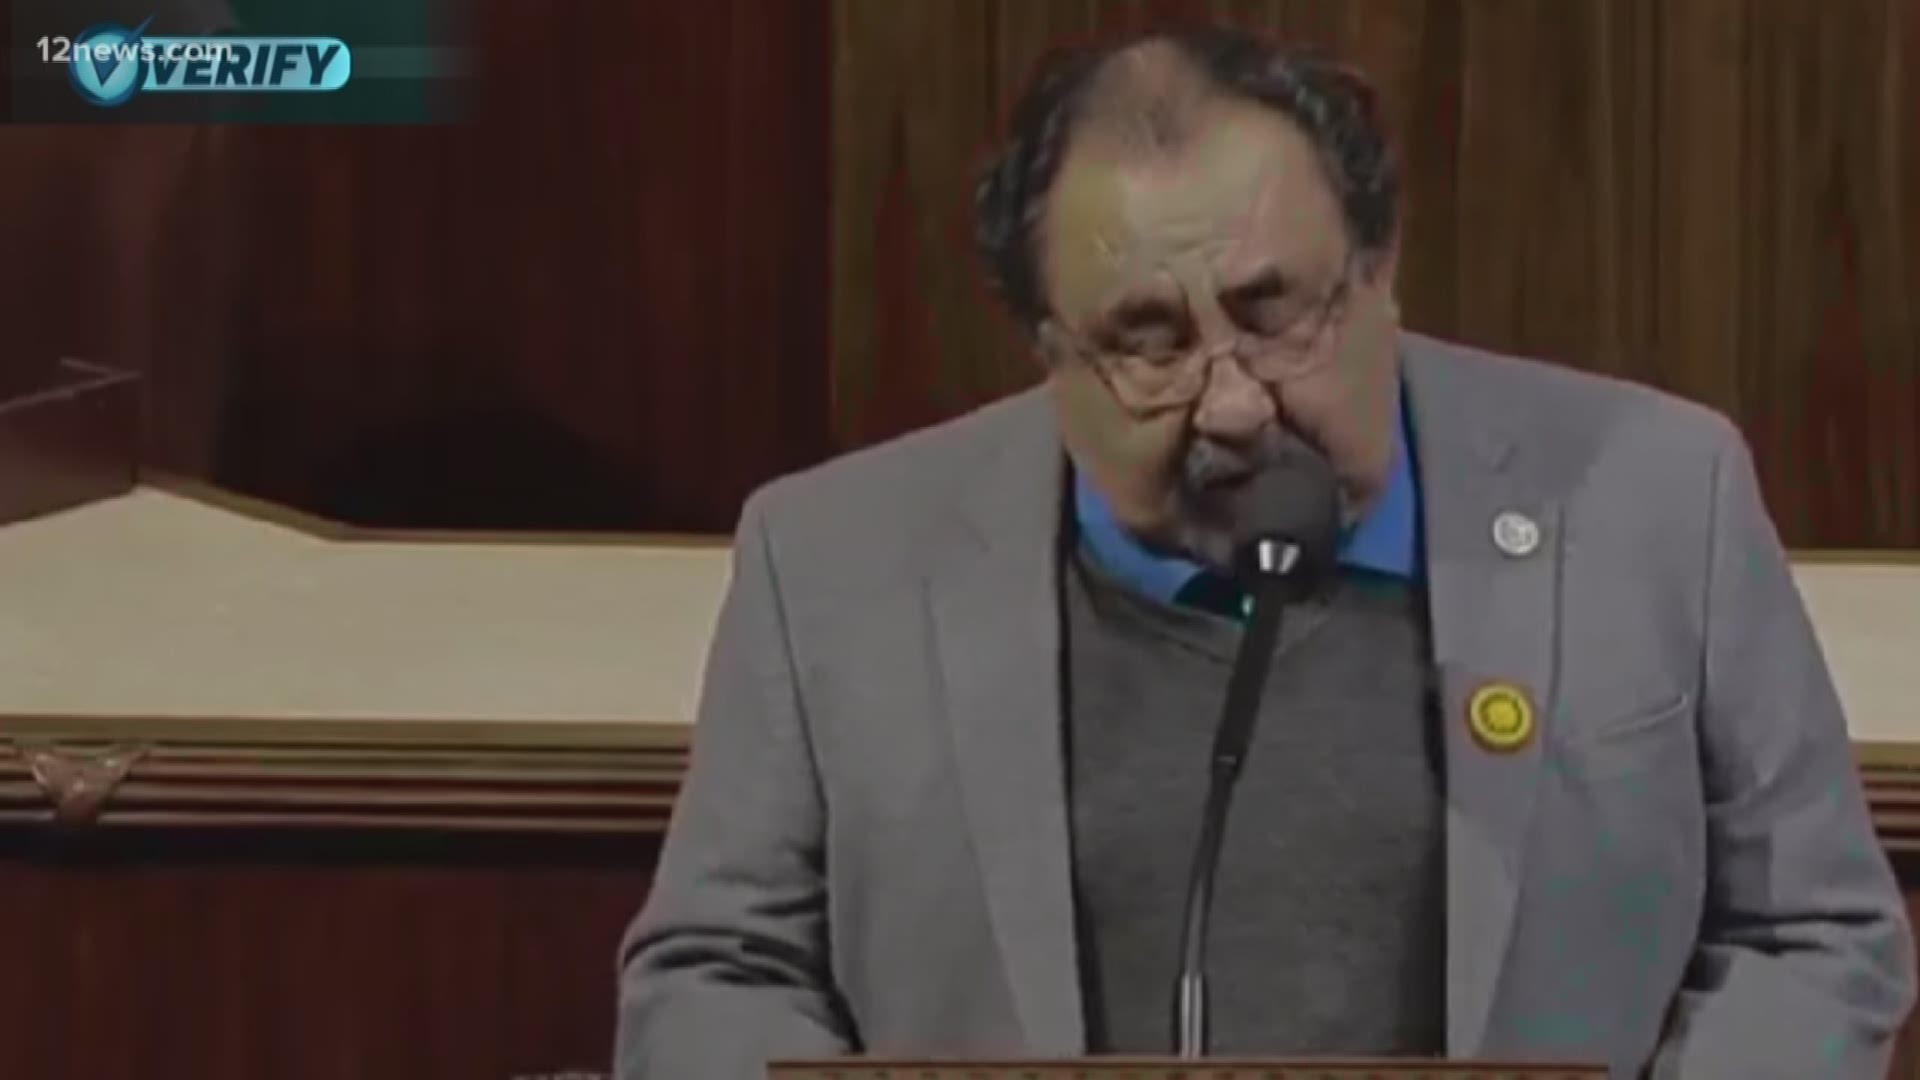 Rep. Grijalva allegedly used tax payer money to pay off a confidential settlement with a former staffer who threatened to sue him for allegations of a hostile work environment and drunkenness.